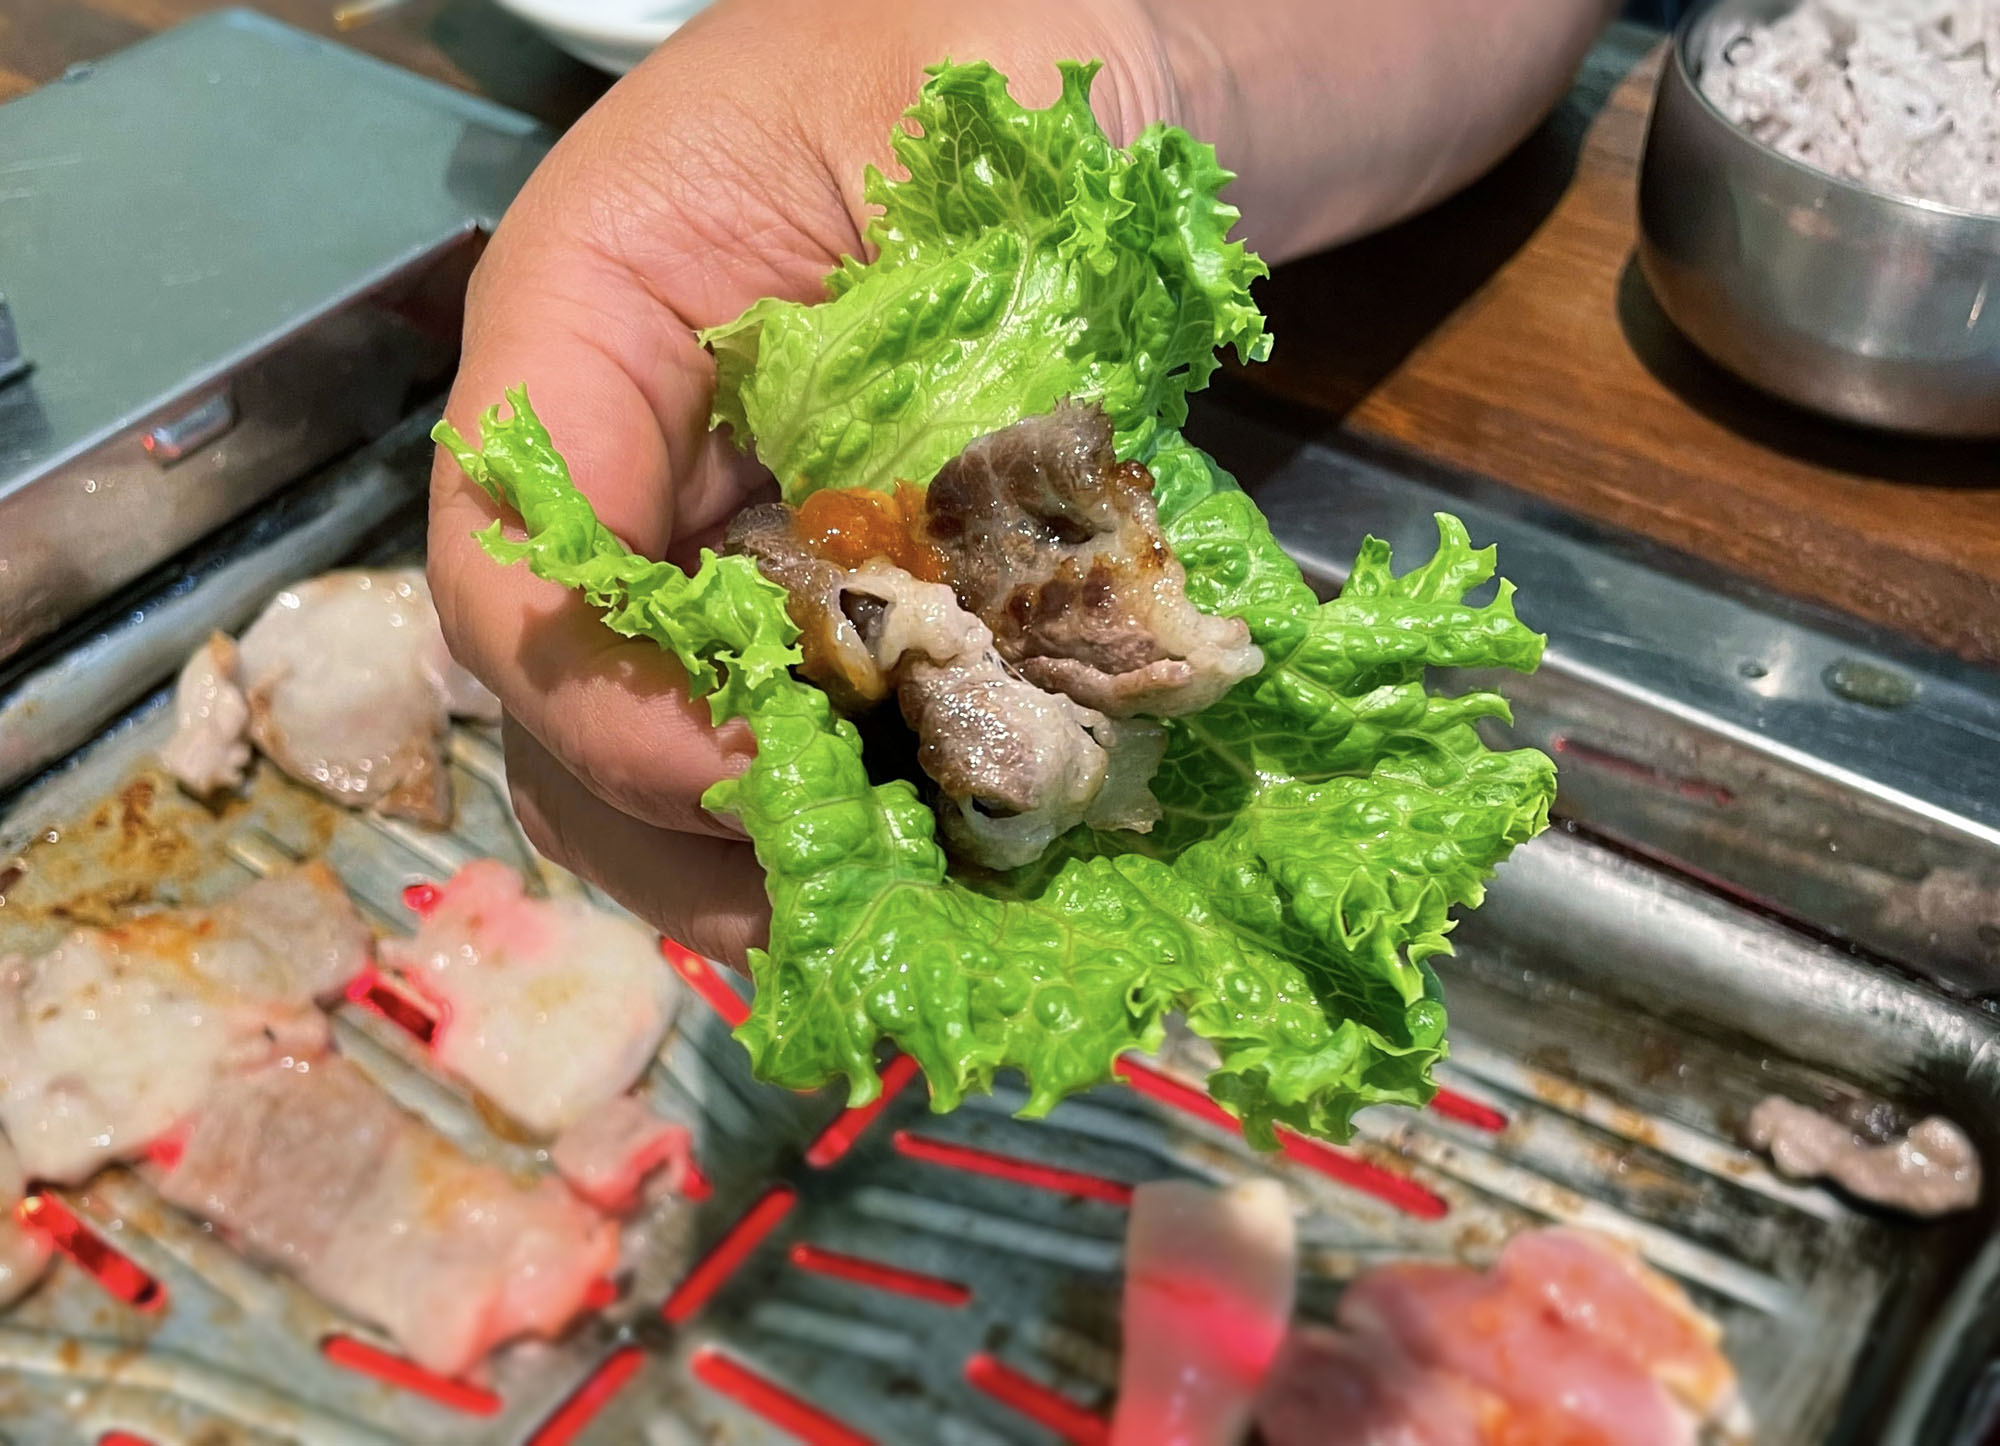 A close-up of a piece of cooked meat wrapped in a lettuce leaf being held by a personâ€™s hand. Photo by Marcus Flinn.